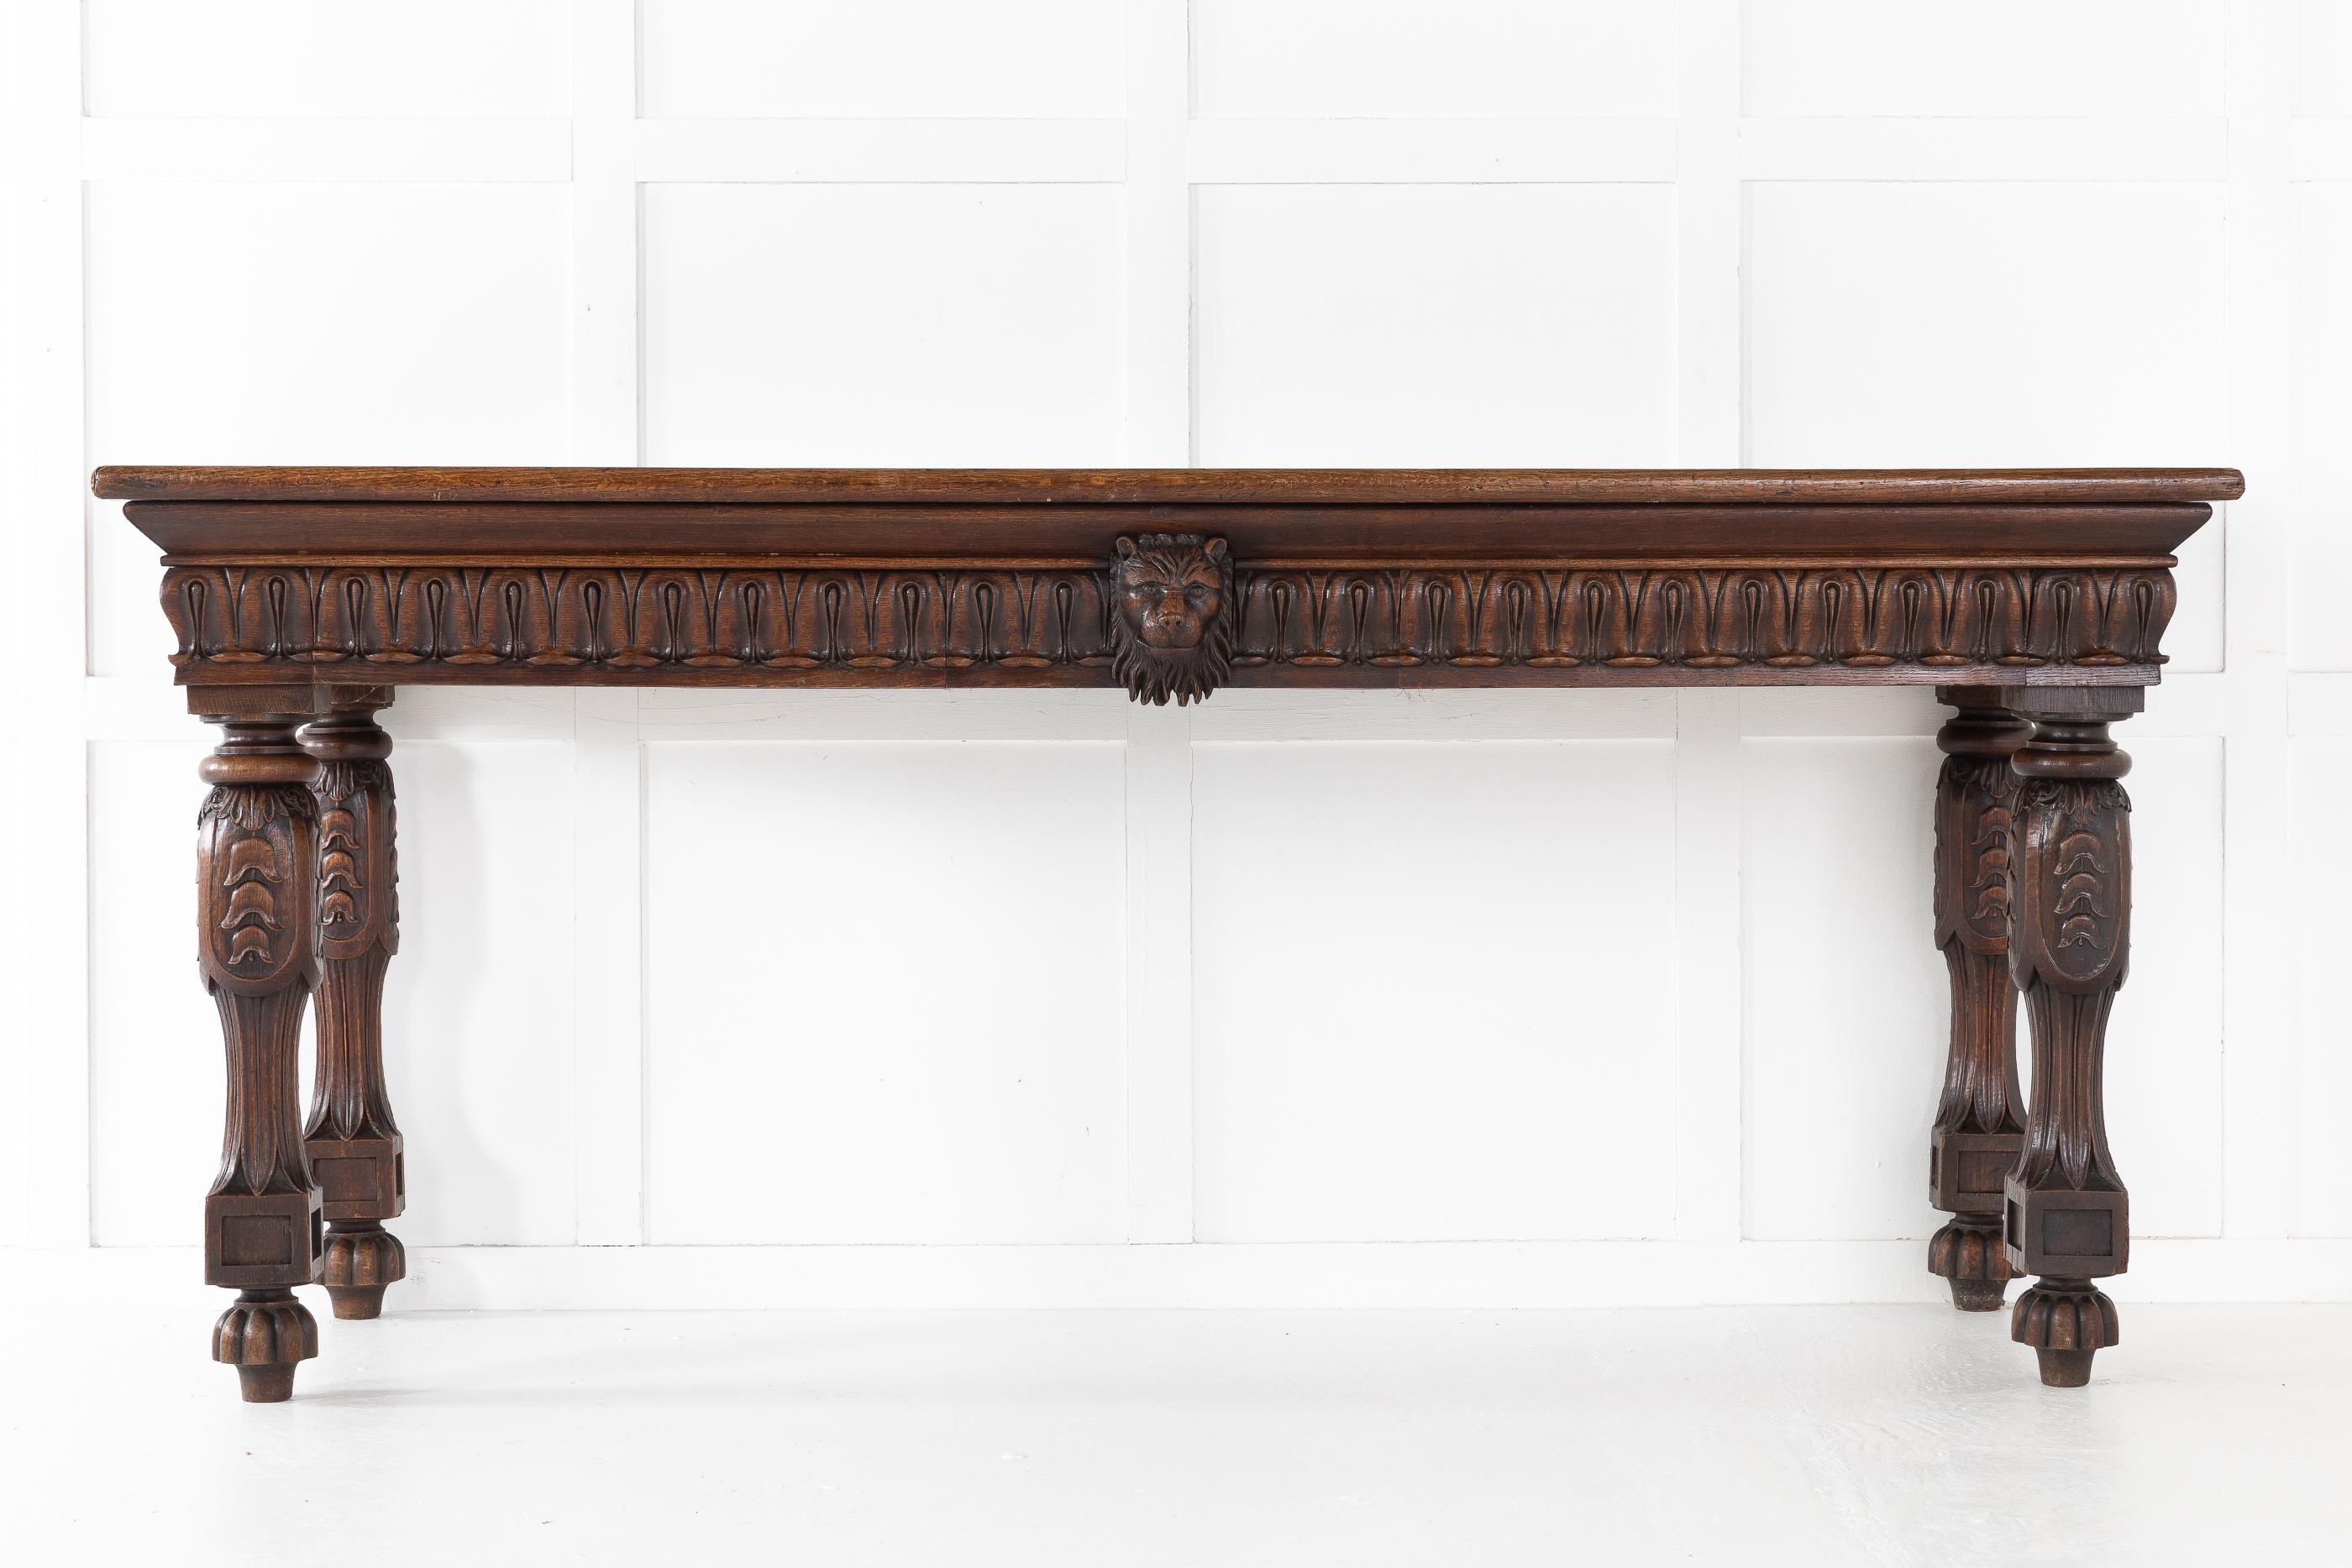 19th century, large scale, English serving table with nicely carved frieze with central carved lion's head and two drawers, supported by unusual carved legs.
 